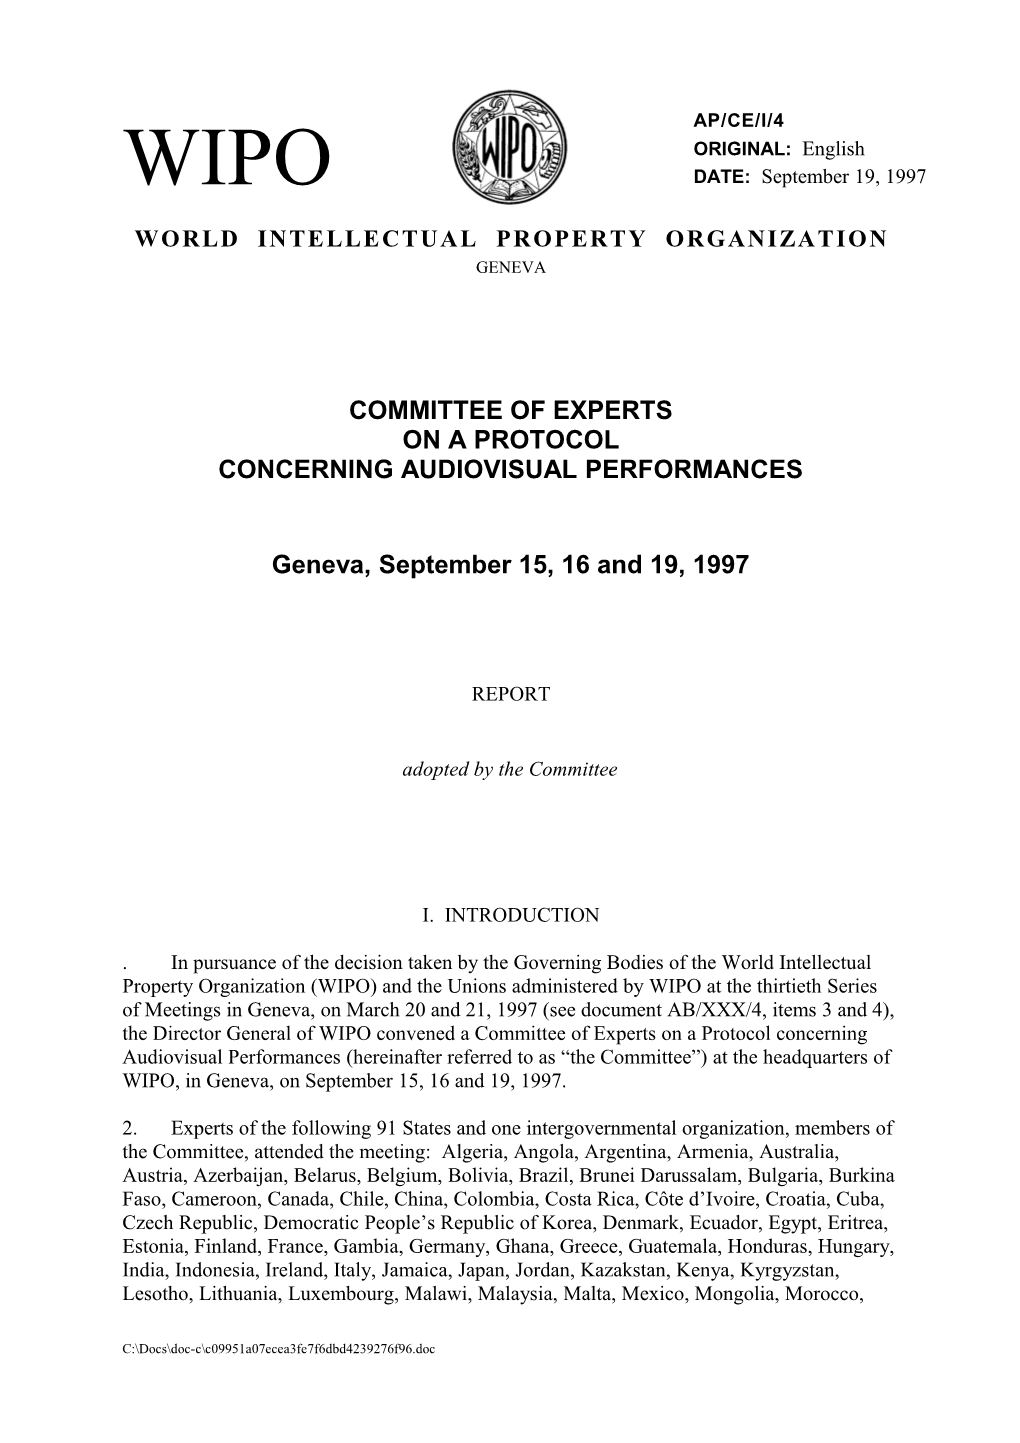 Committee of Experts on a Protocol Concerning Audiovisual Performances